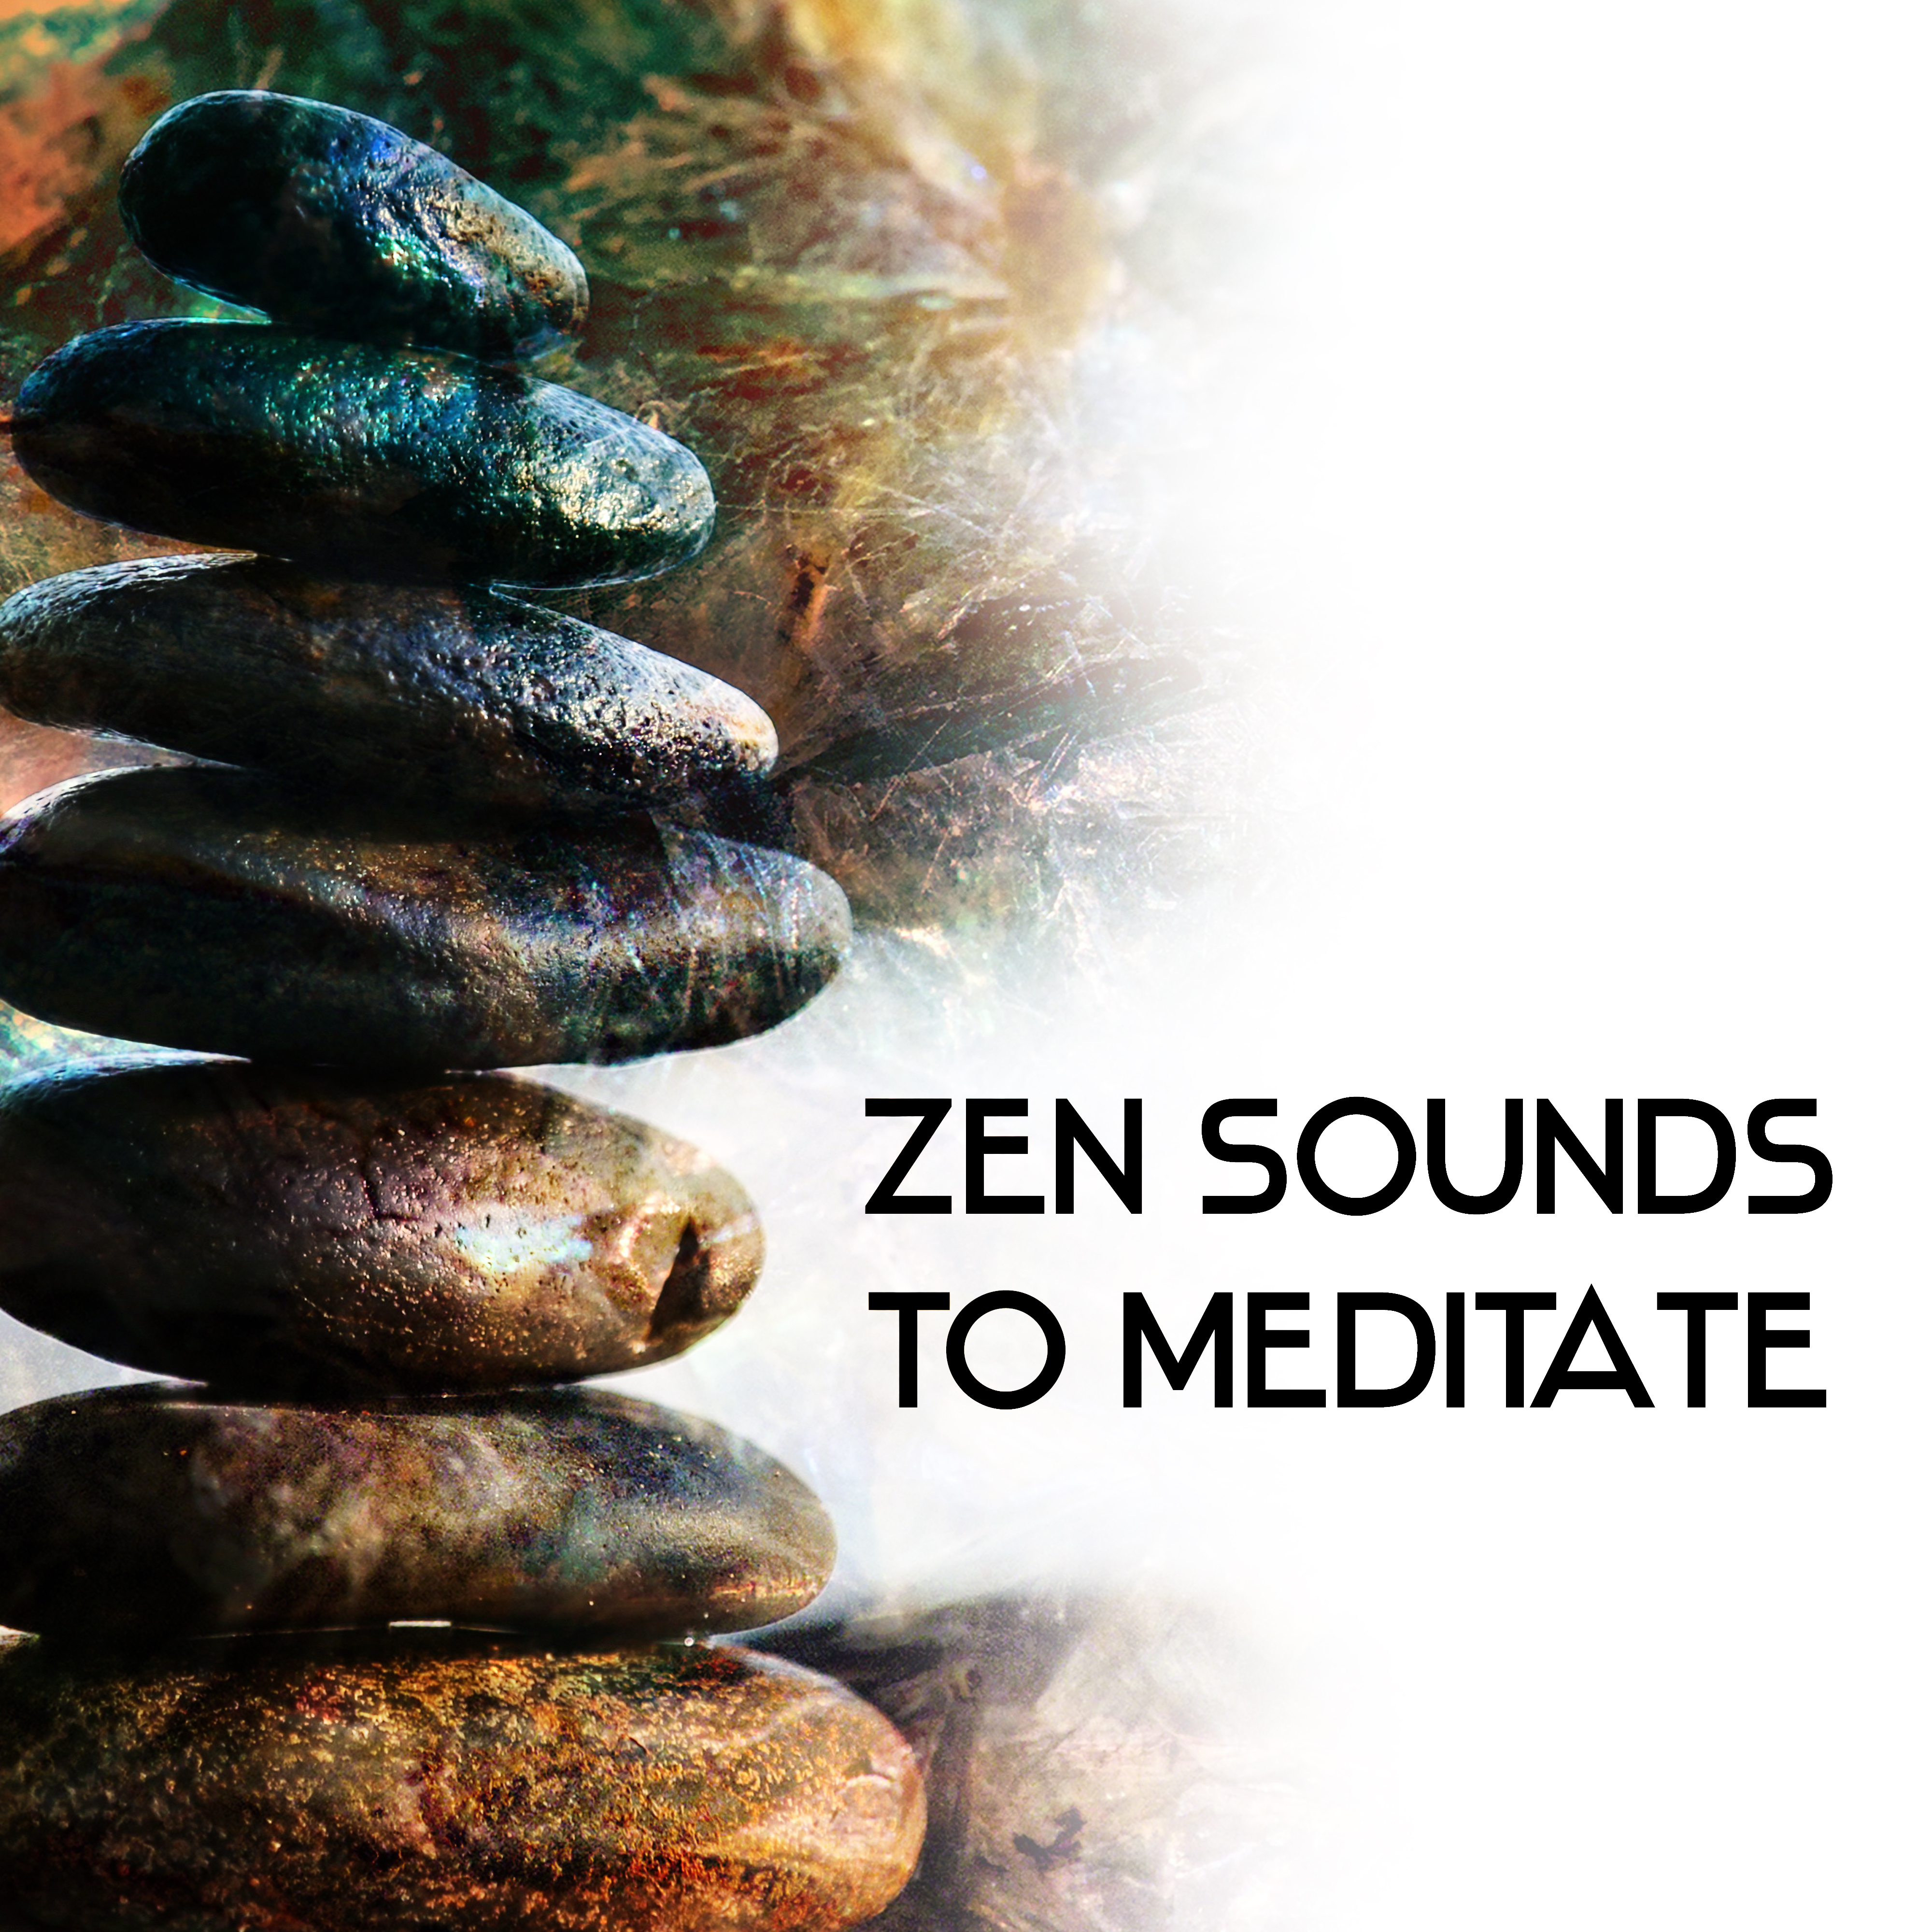 Zen Sounds to Meditate  Calming Sounds to Rest  Relax, New Age Music to Meditate, Inner Peace